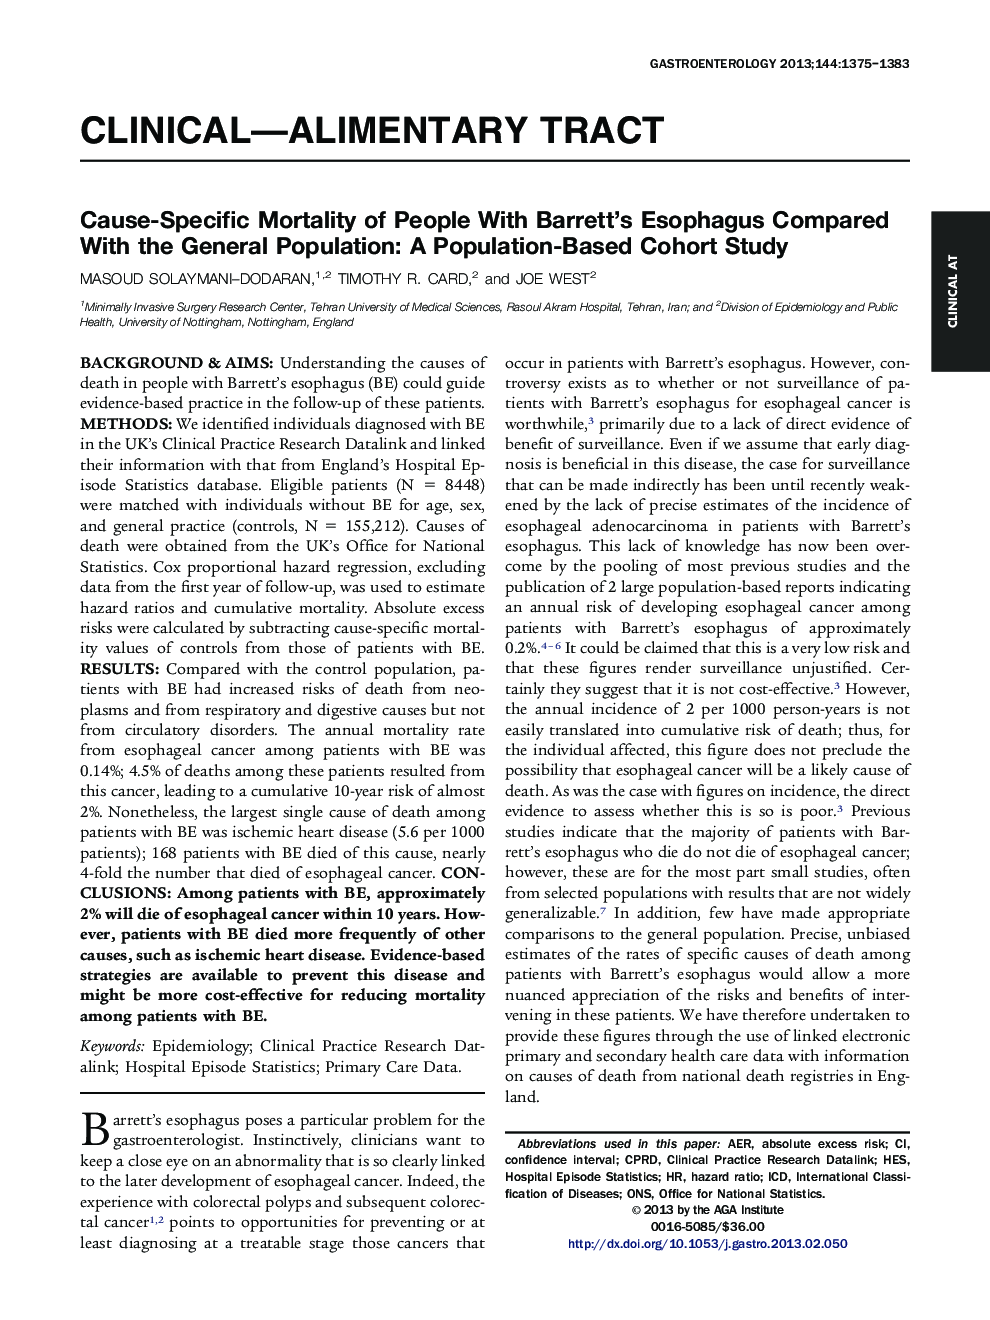 Cause-Specific Mortality of People With Barrett's Esophagus Compared With the General Population: A Population-Based Cohort Study